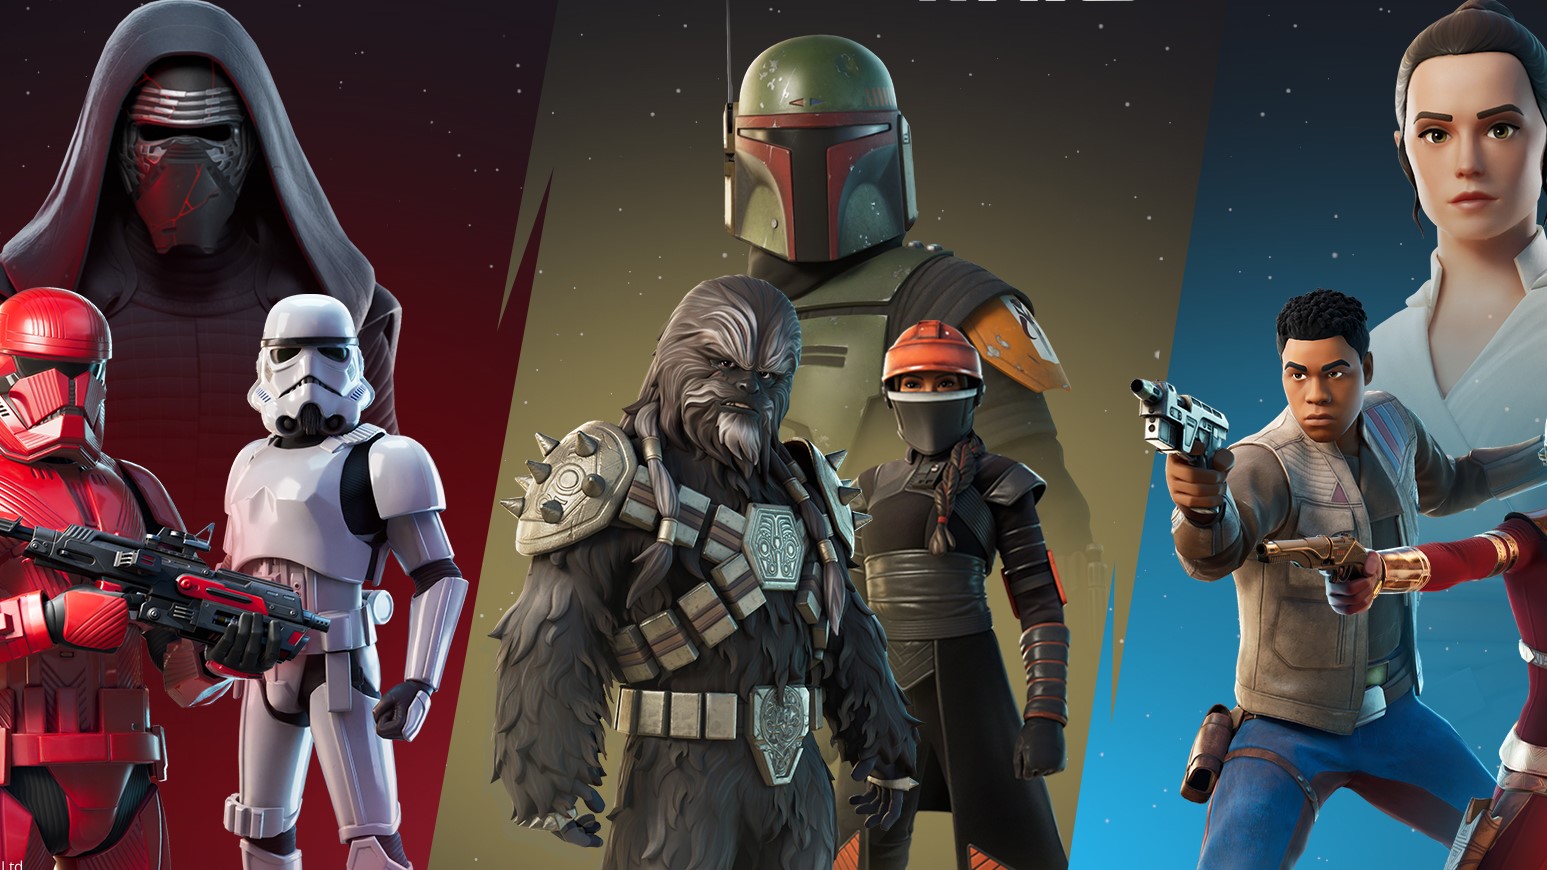 Fortnite Star Wars Collaboration Outfits.